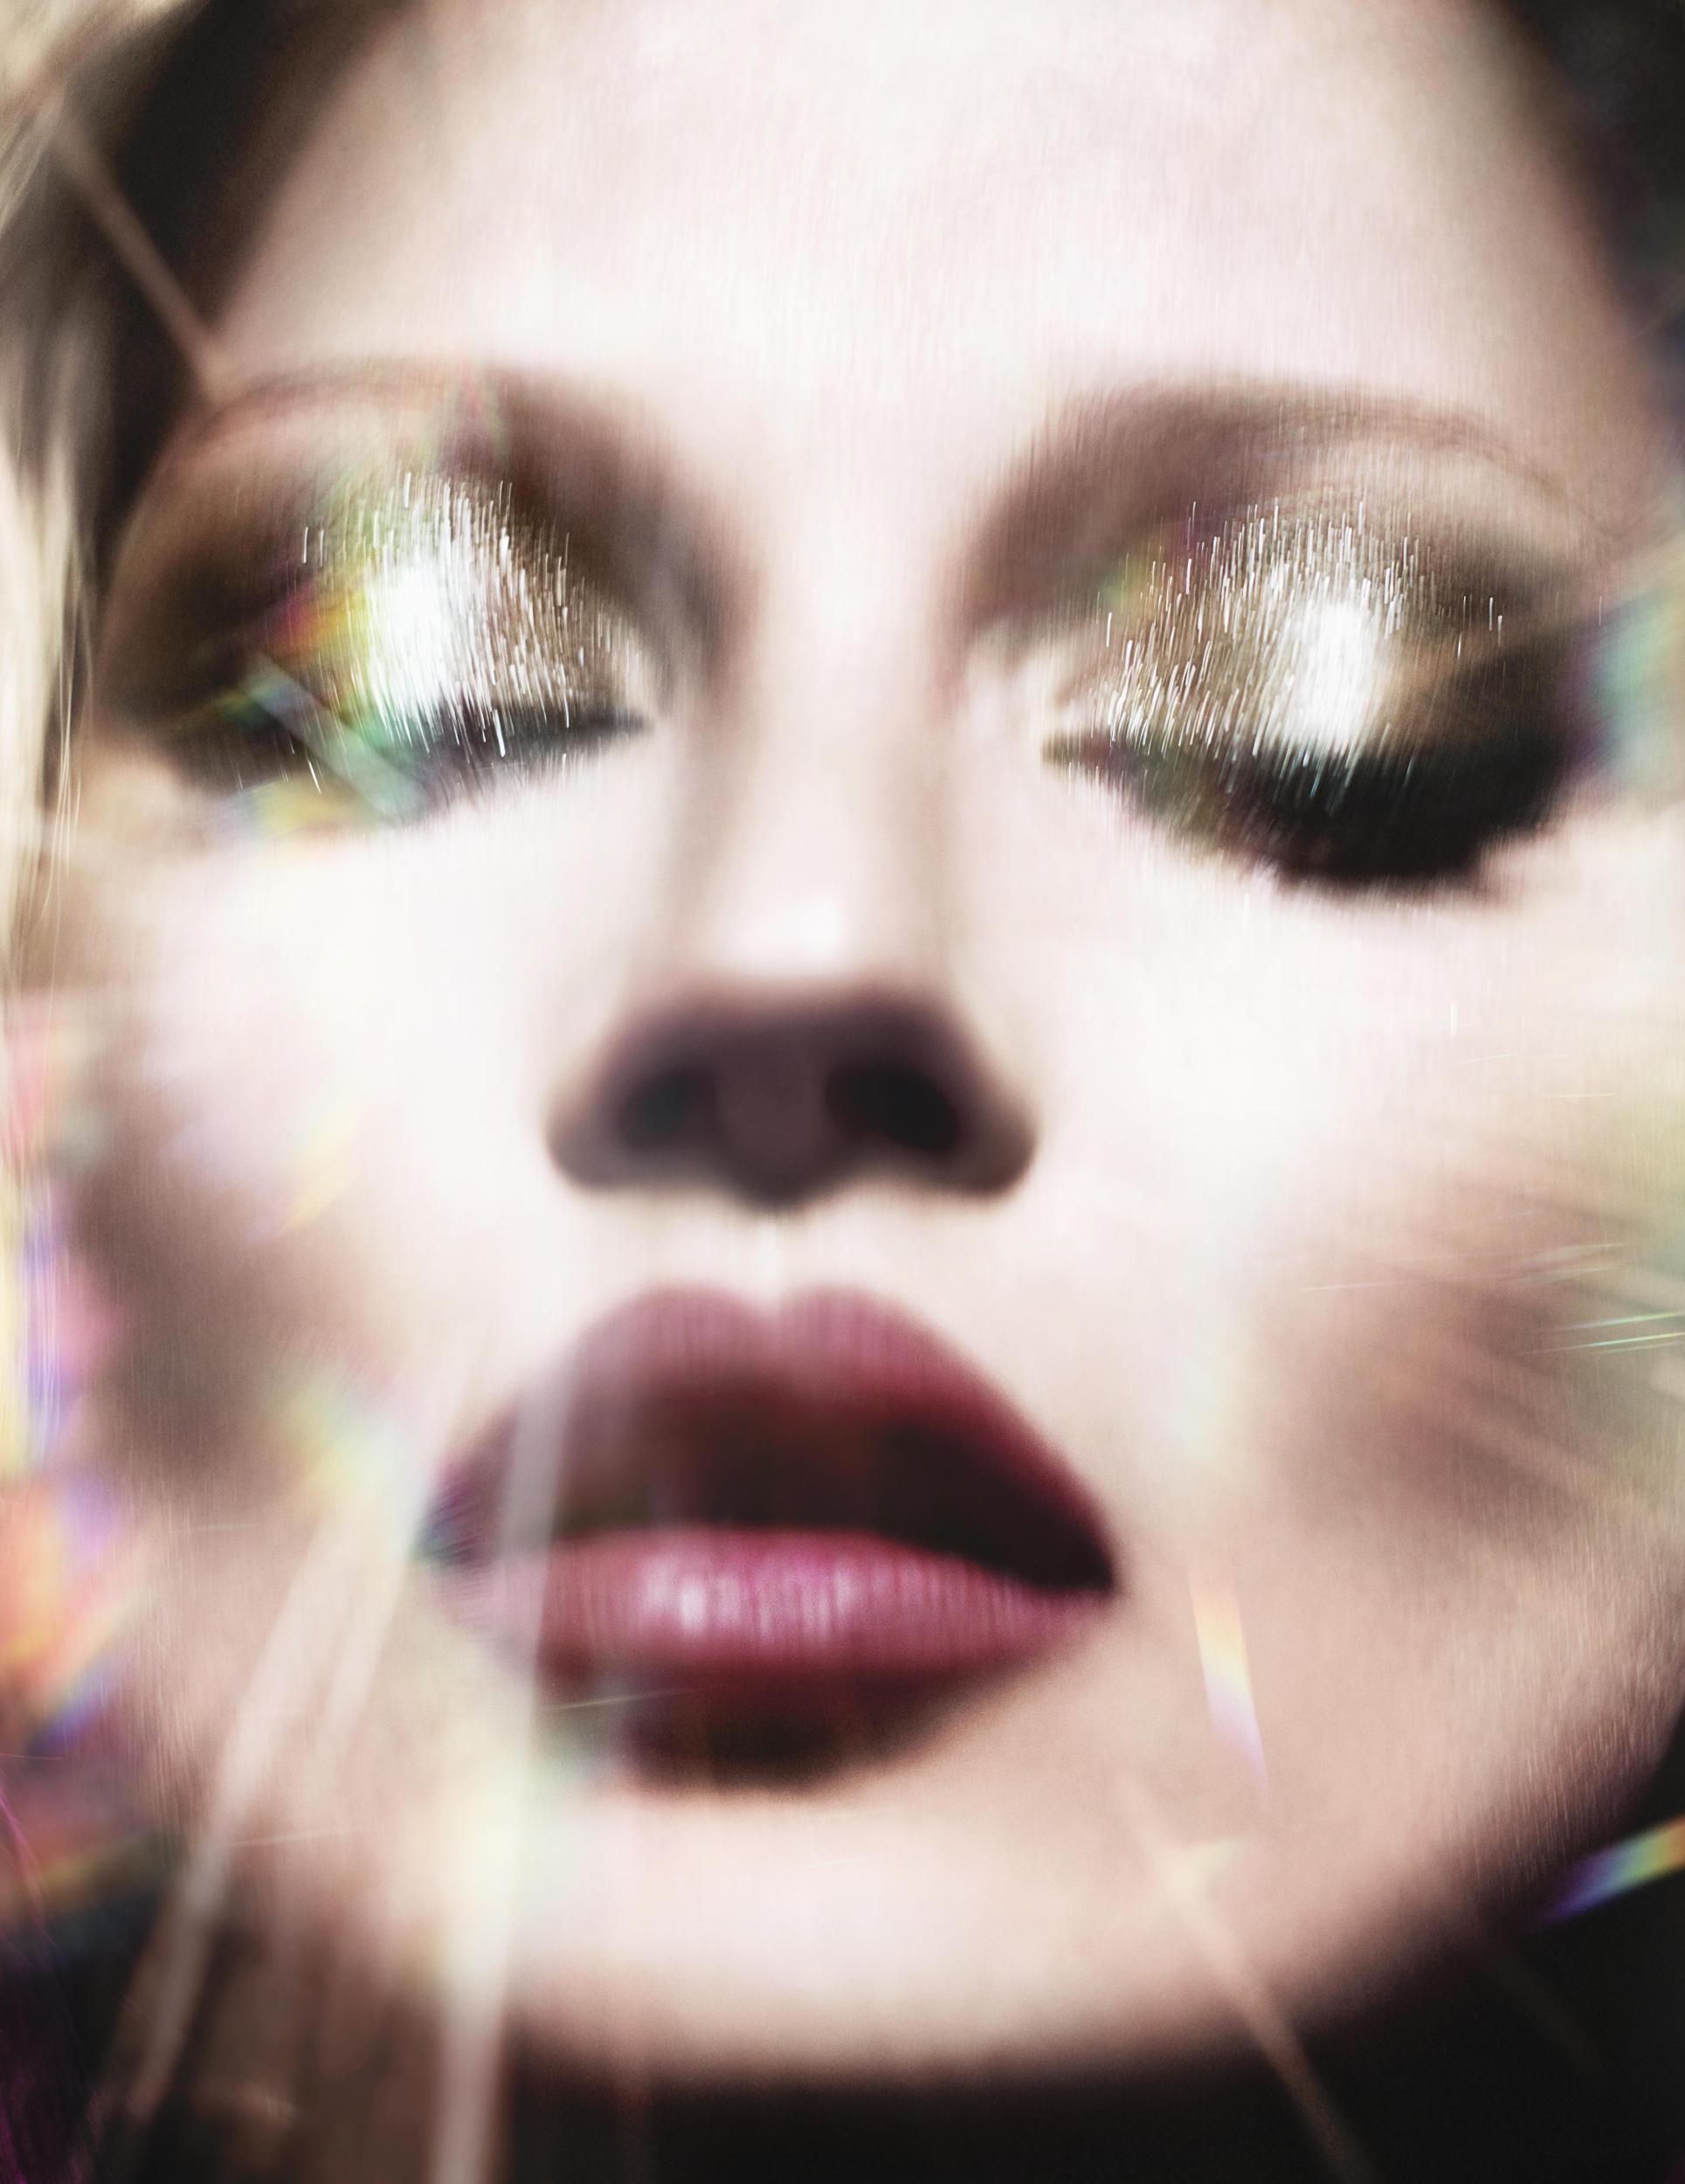 Kate Moss is the face of Charlotte Tilbury’s debut fragrance, Scent of a Dream